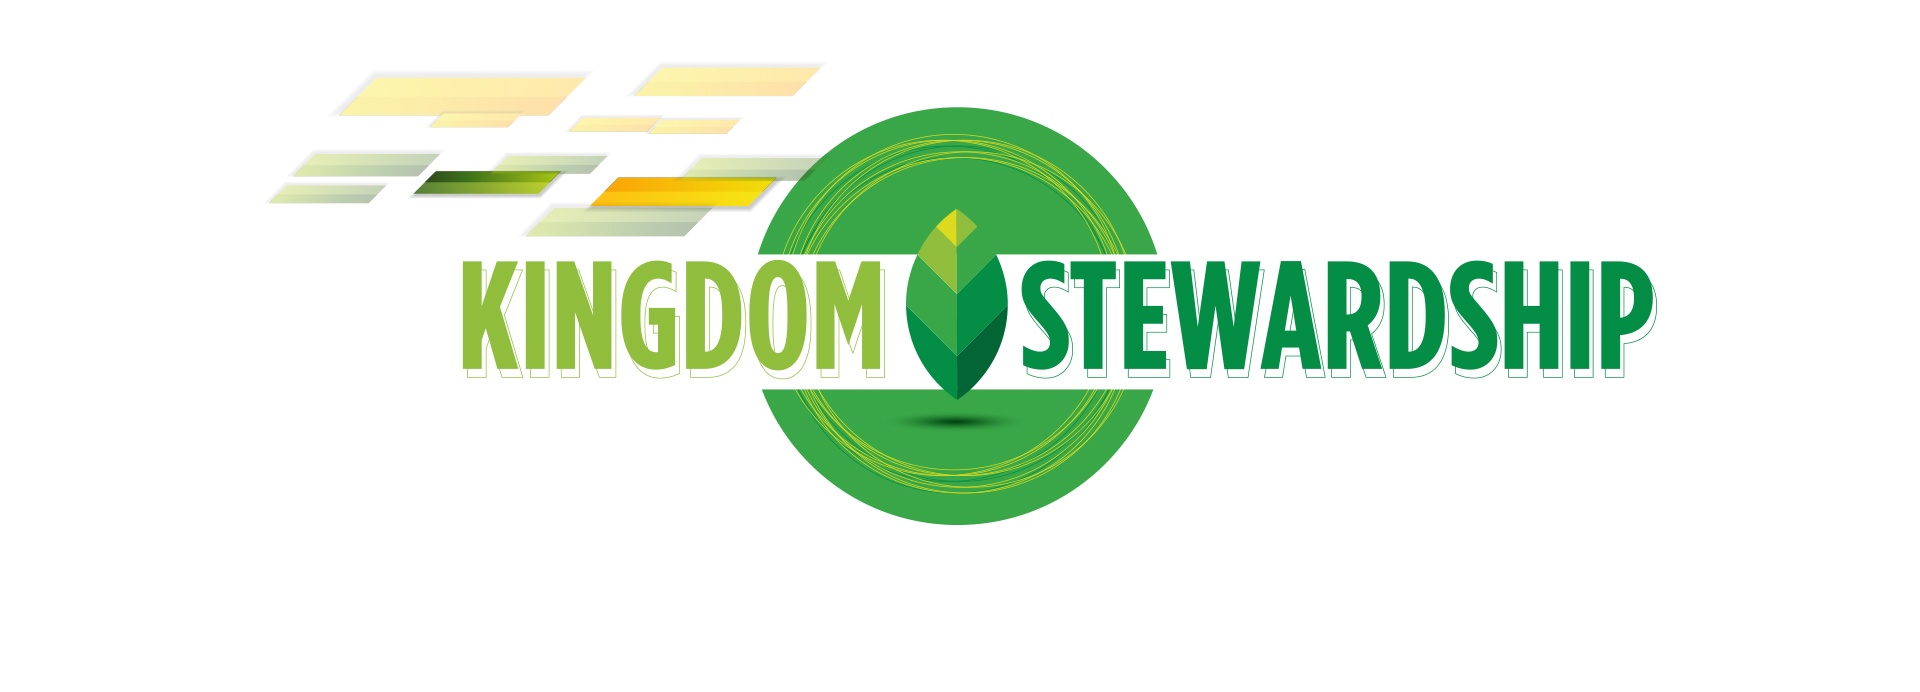 The Meaning of Stewardship